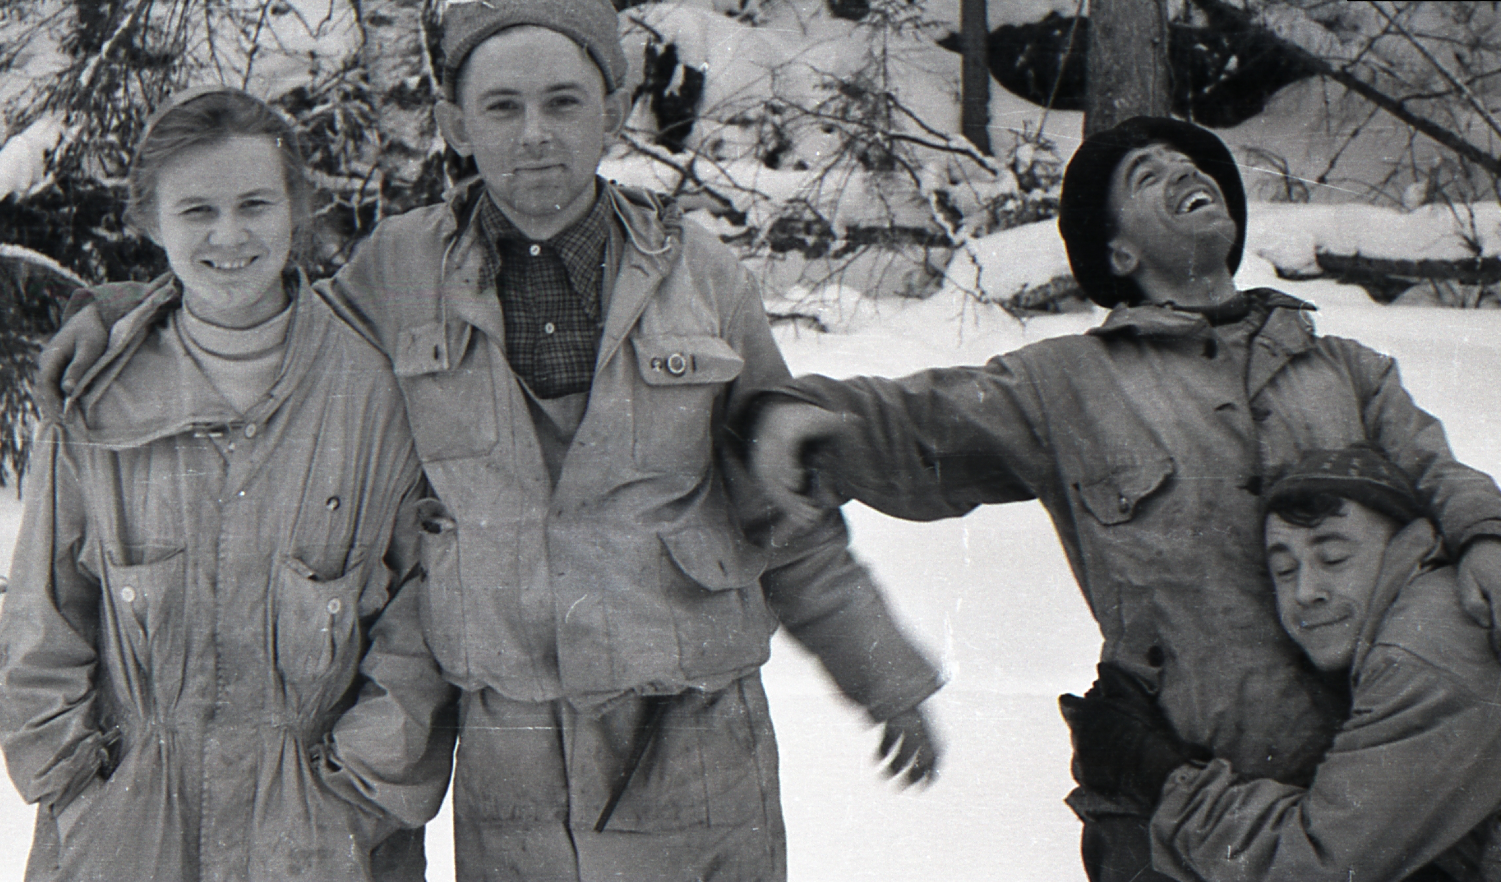 Some of the Dyatlov Pass hikers, seen in a vintage photo developed from the film they left behind (Image: 1091 Pictures)